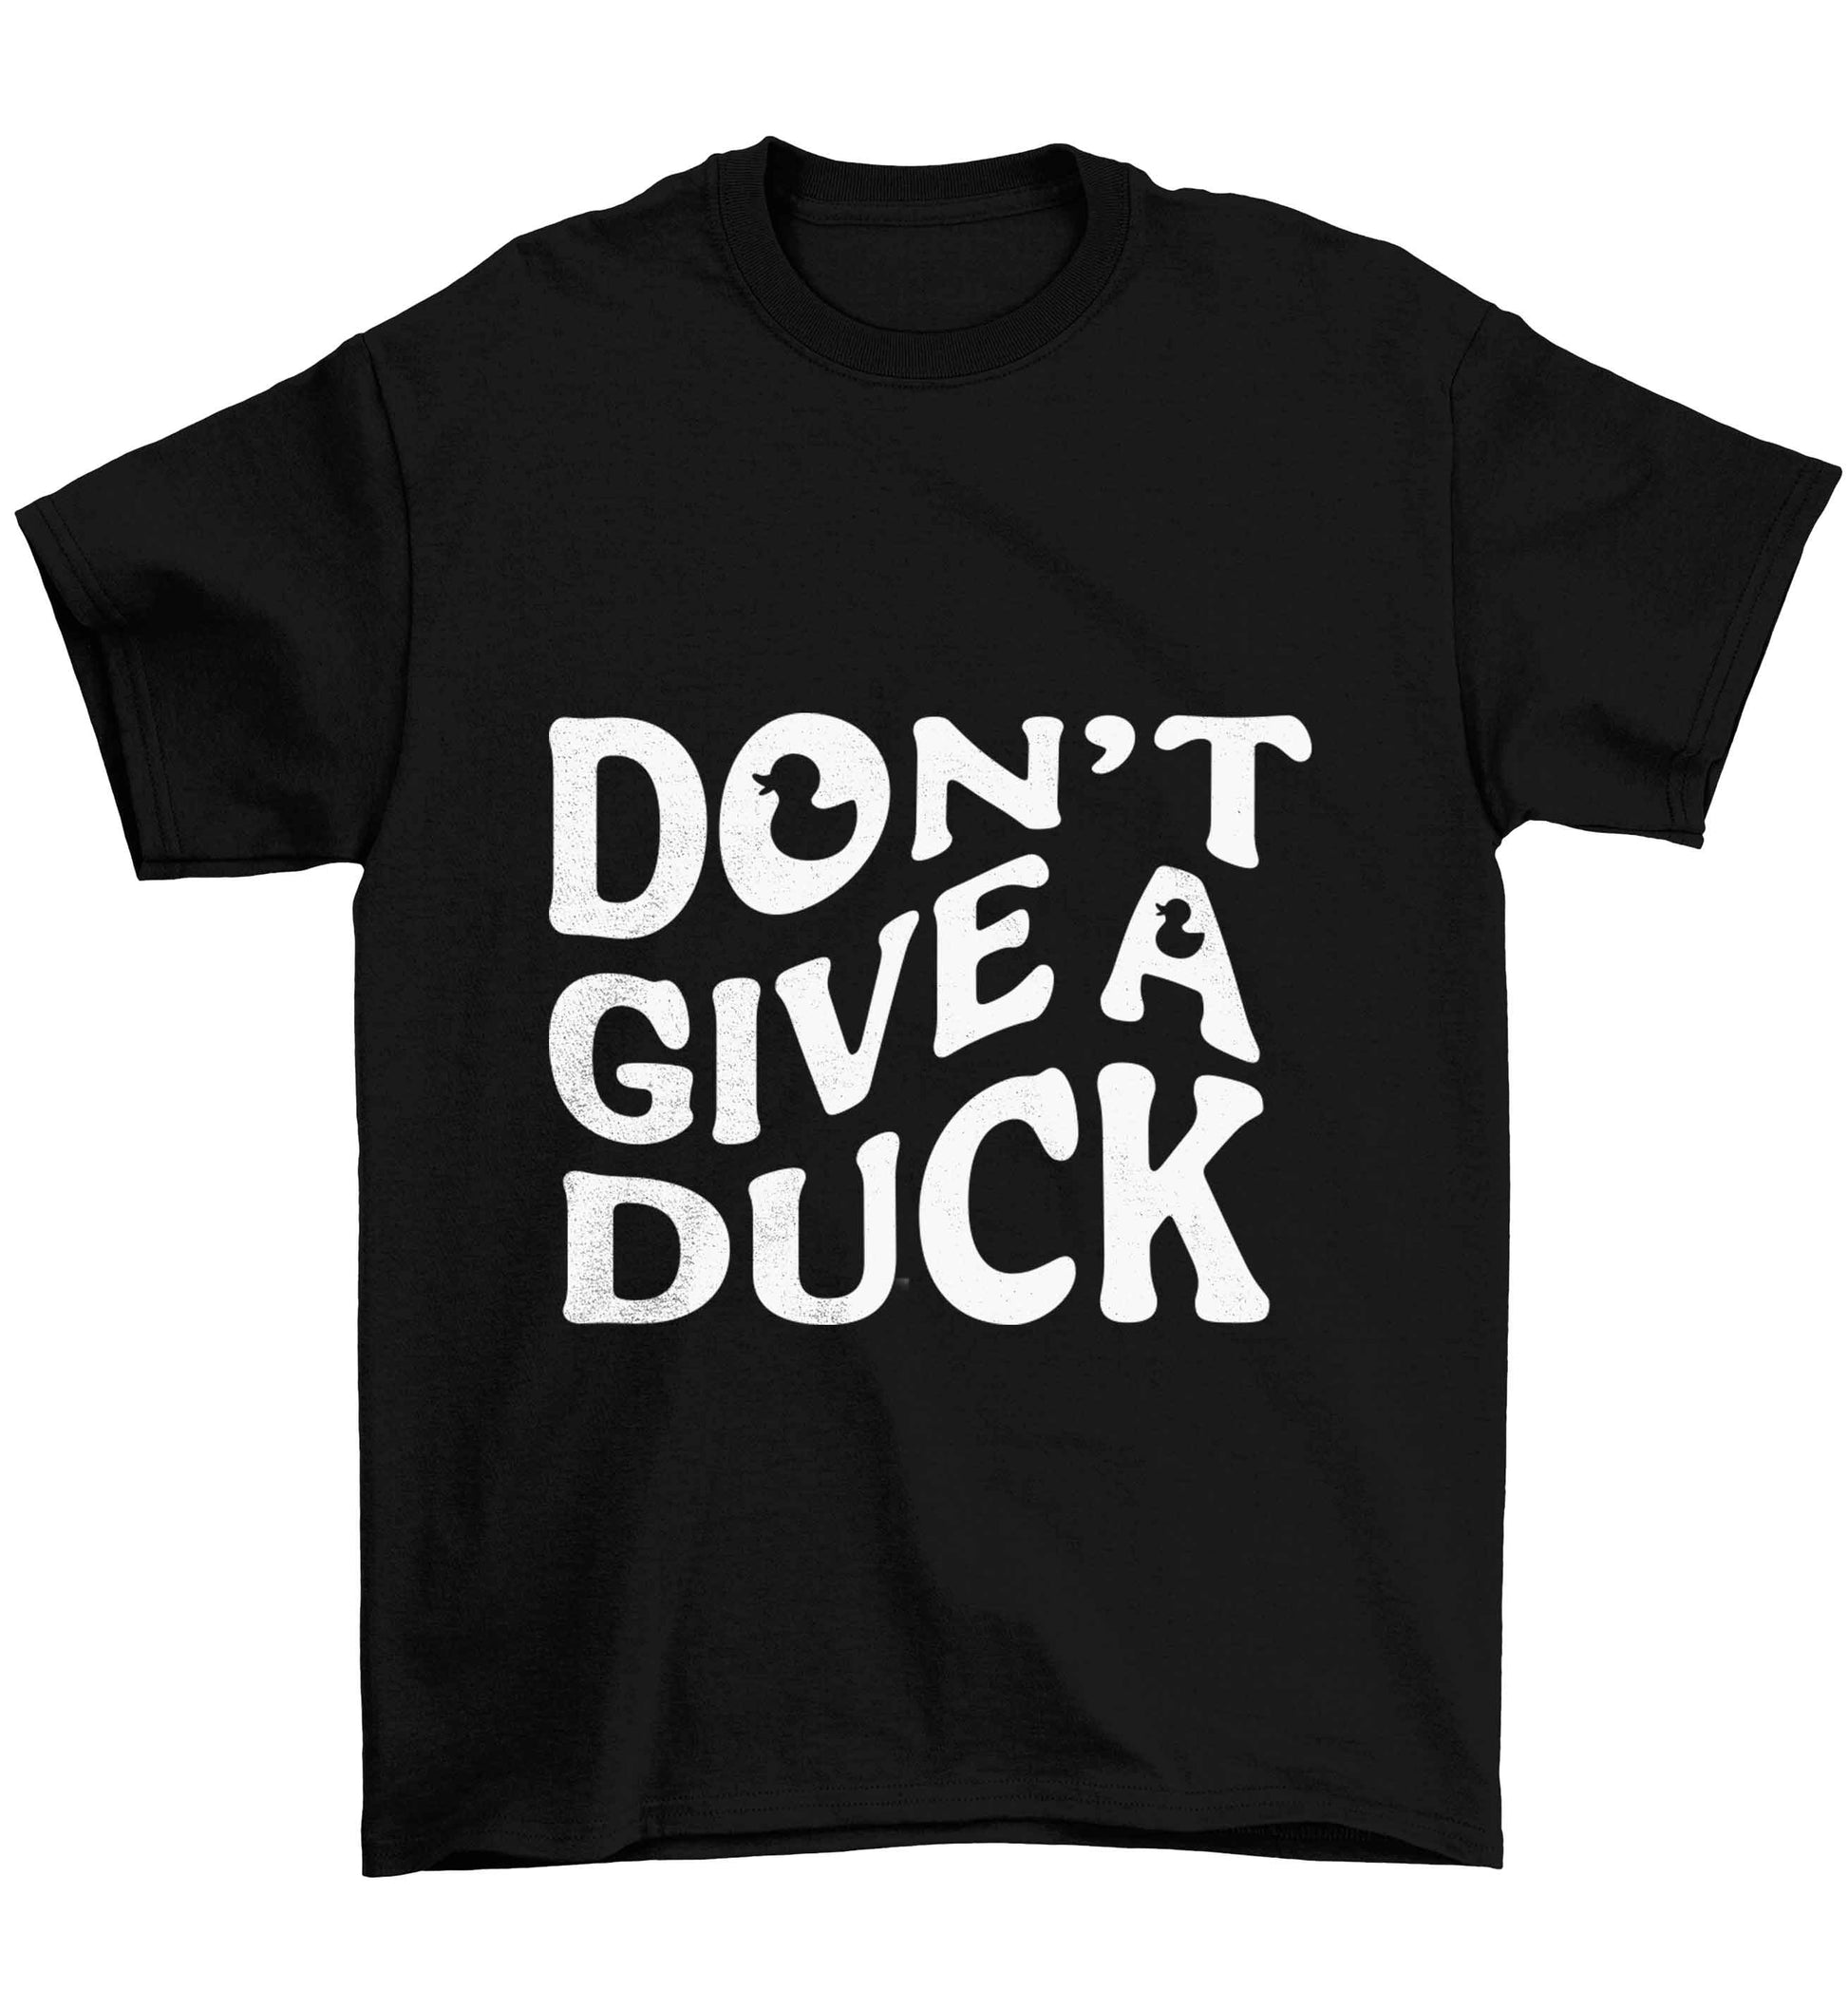 Don't give a duck Children's black Tshirt 12-13 Years